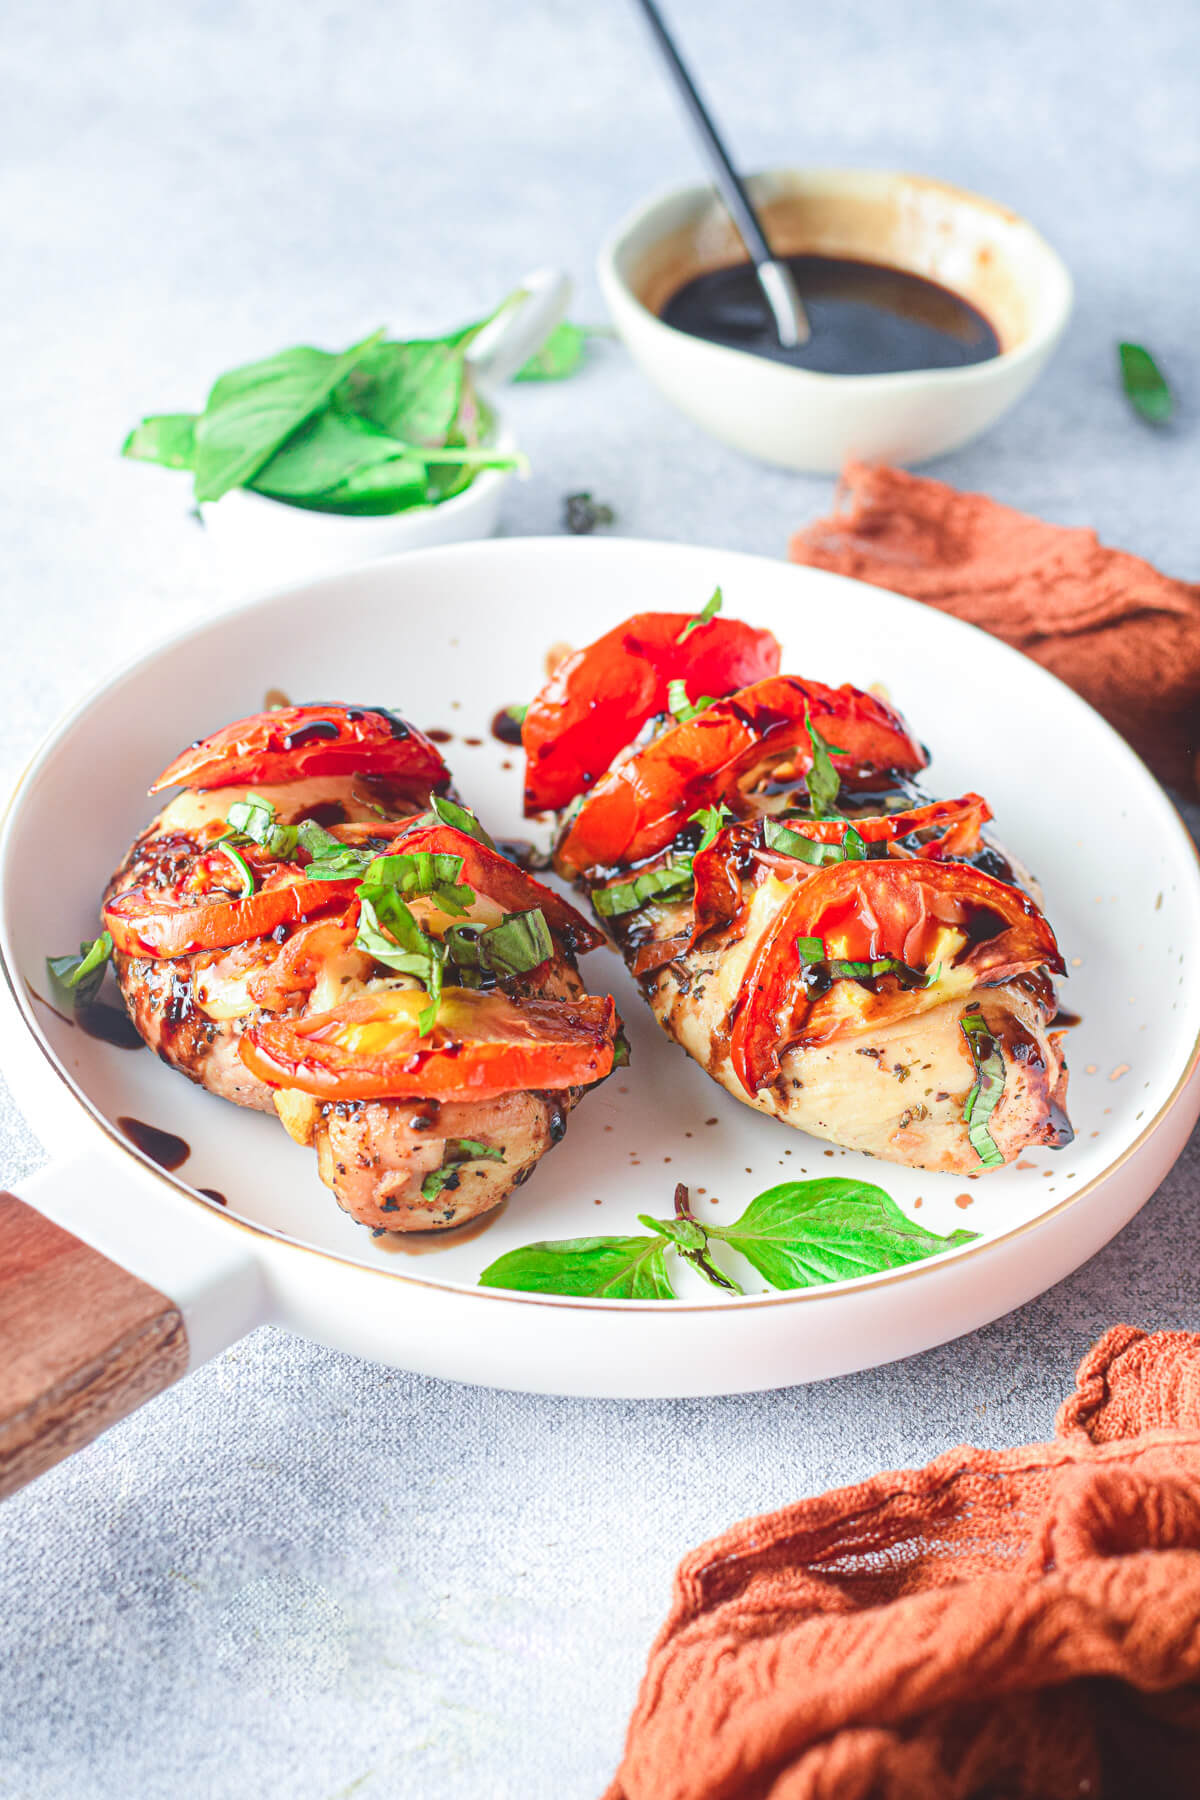 Two chicken caprese stuffed with mozzarella and tomatoes then garnished with fresh basil and balsamic drizzle.